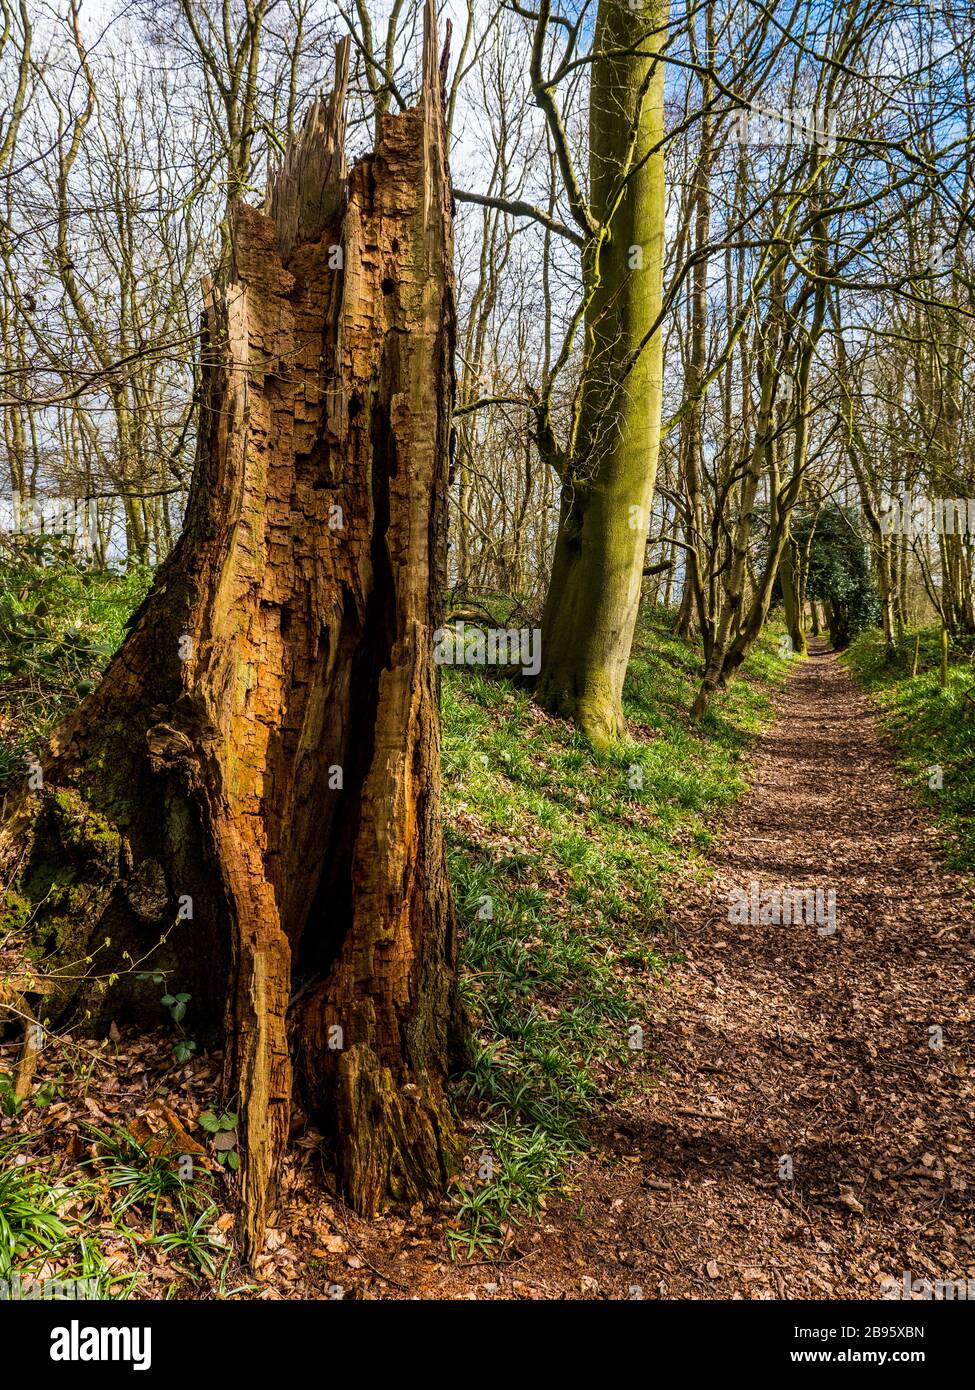 Woodland Path, Old Rotten Tree, Chiltern Hills, The Ridgeway National Path, Nufield, Oxfordshire, Enhangland, Royaume-Uni, GB. Banque D'Images